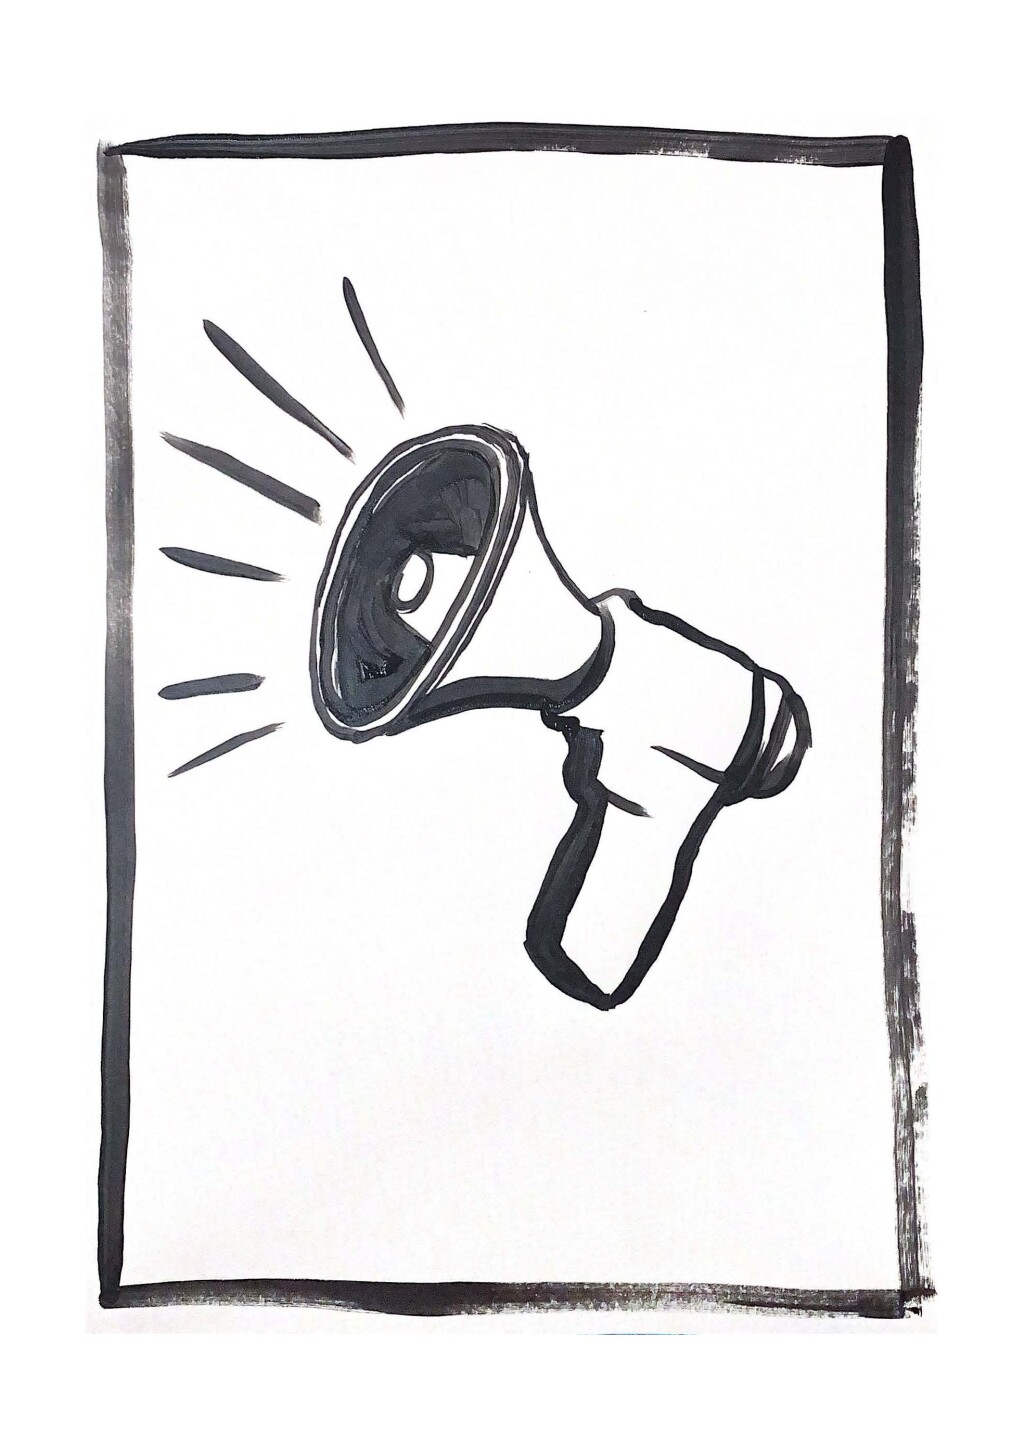 Black and white drawing of a megaphone